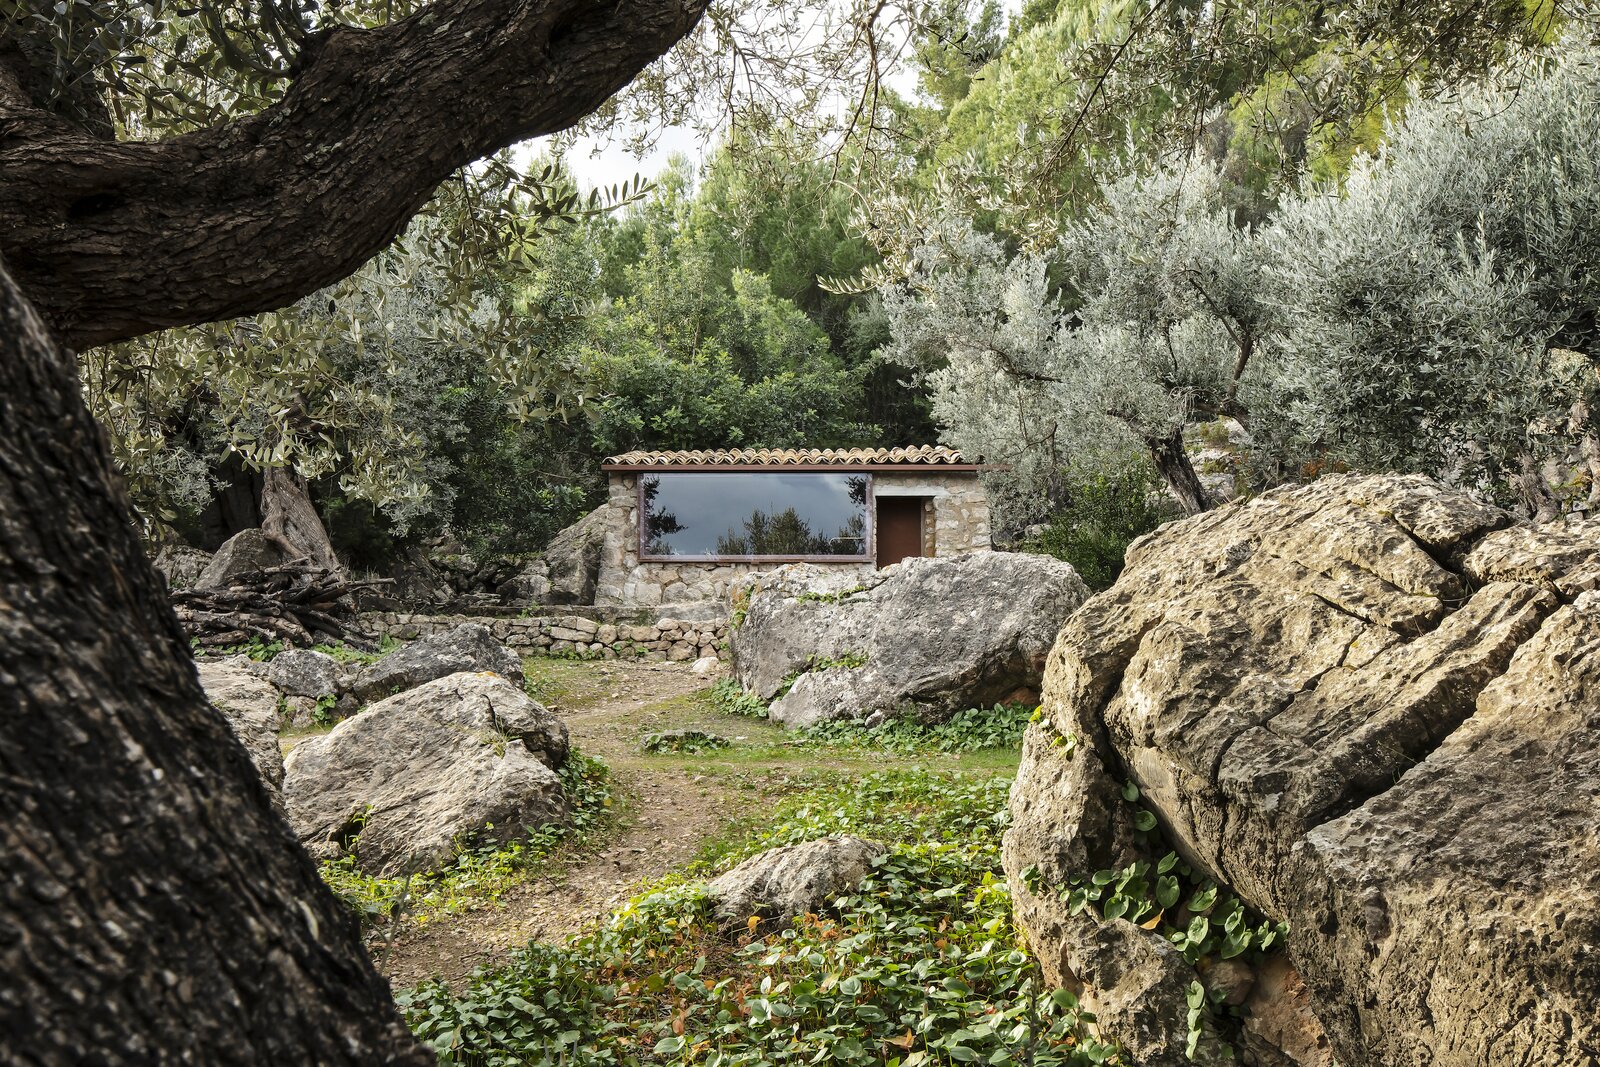 A Pair of Pink and Purple Tiny Houses Take Root in an Idyllic Olive Grove